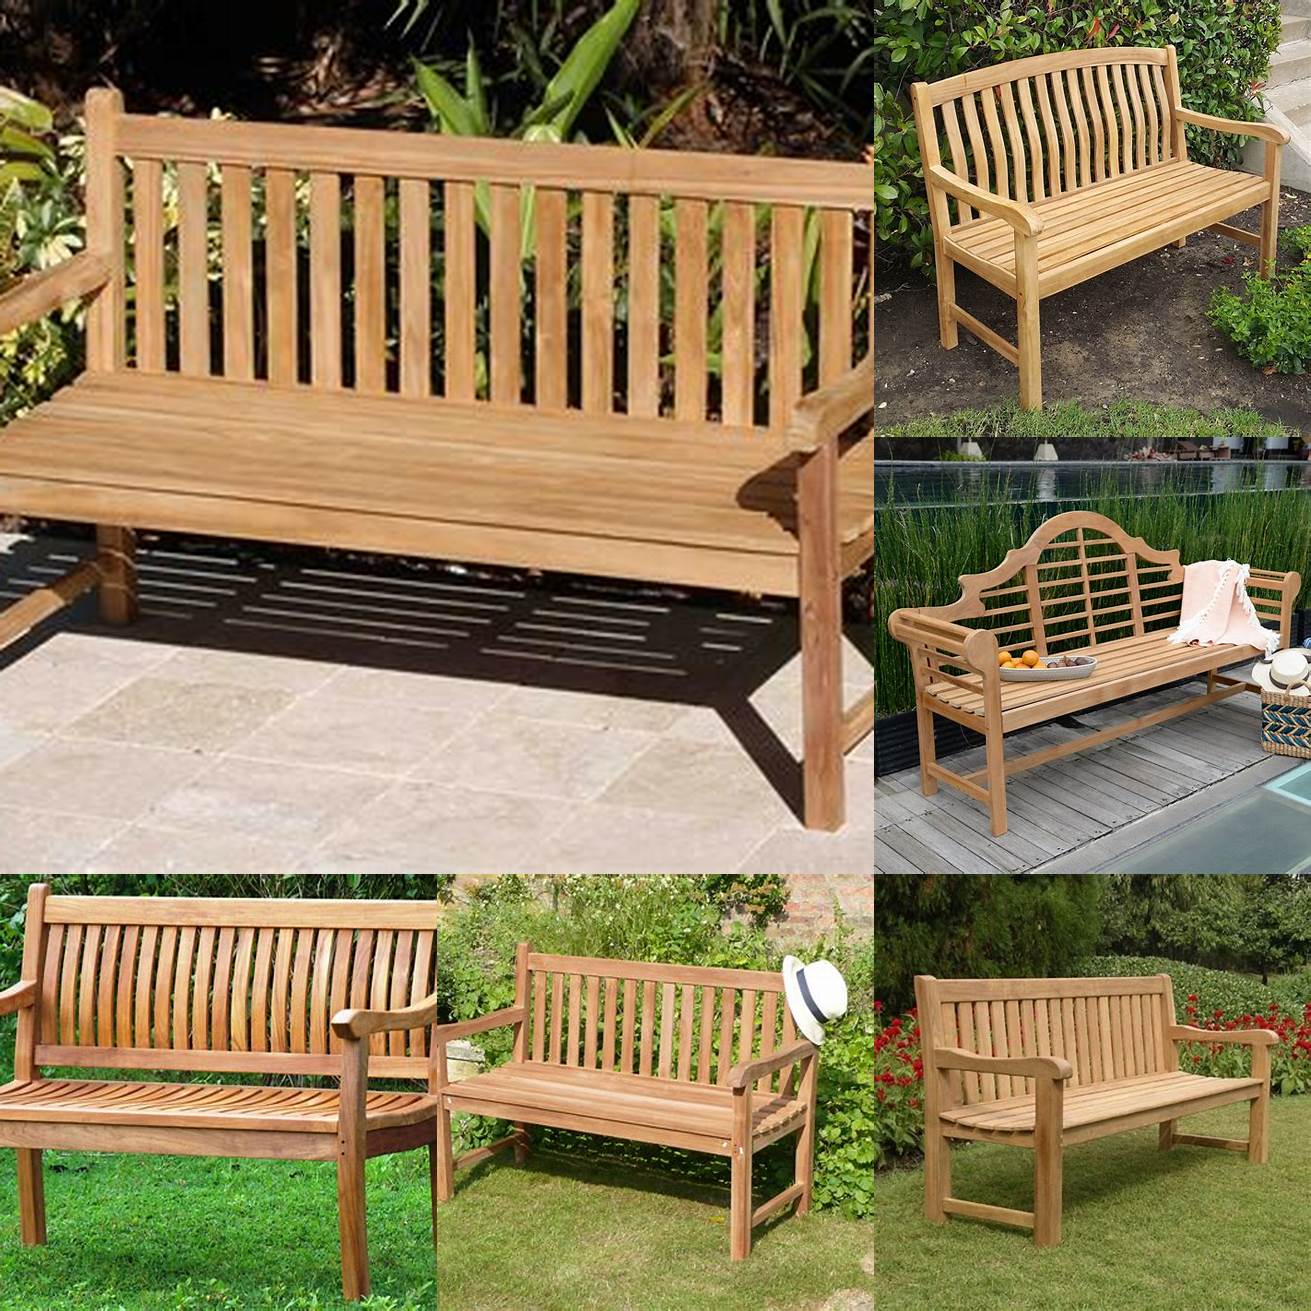 Teak Boatwood Outdoor Benches